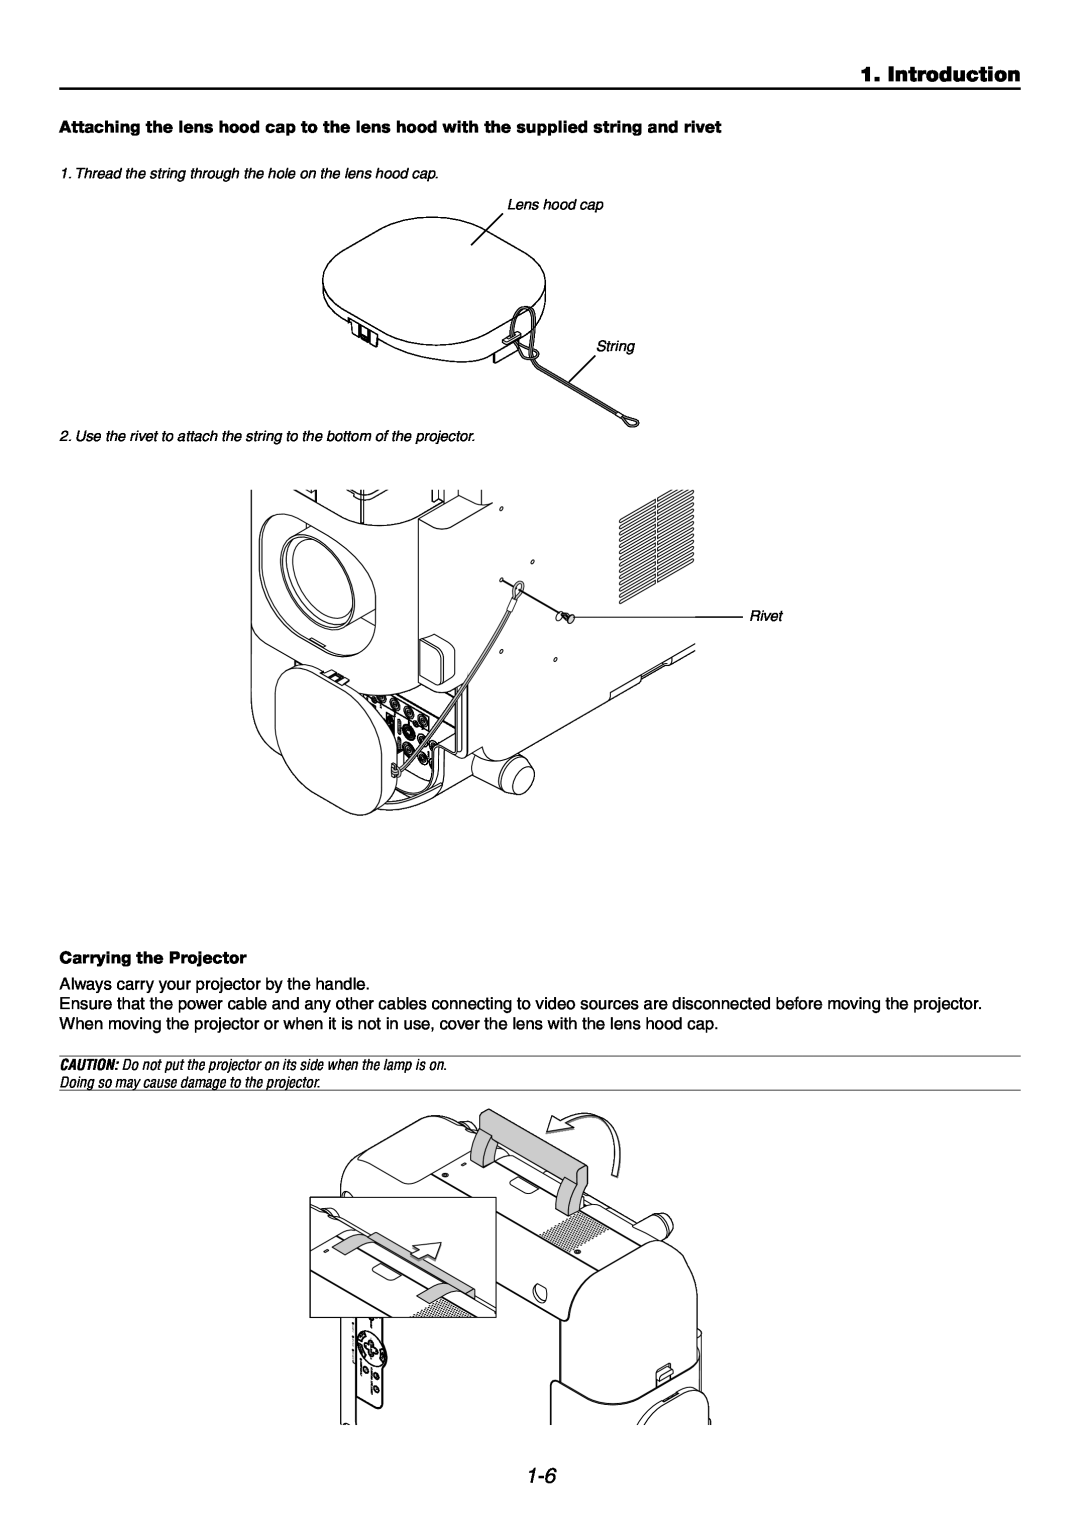 NEC GT6000 user manual Introduction, Carrying the Projector 